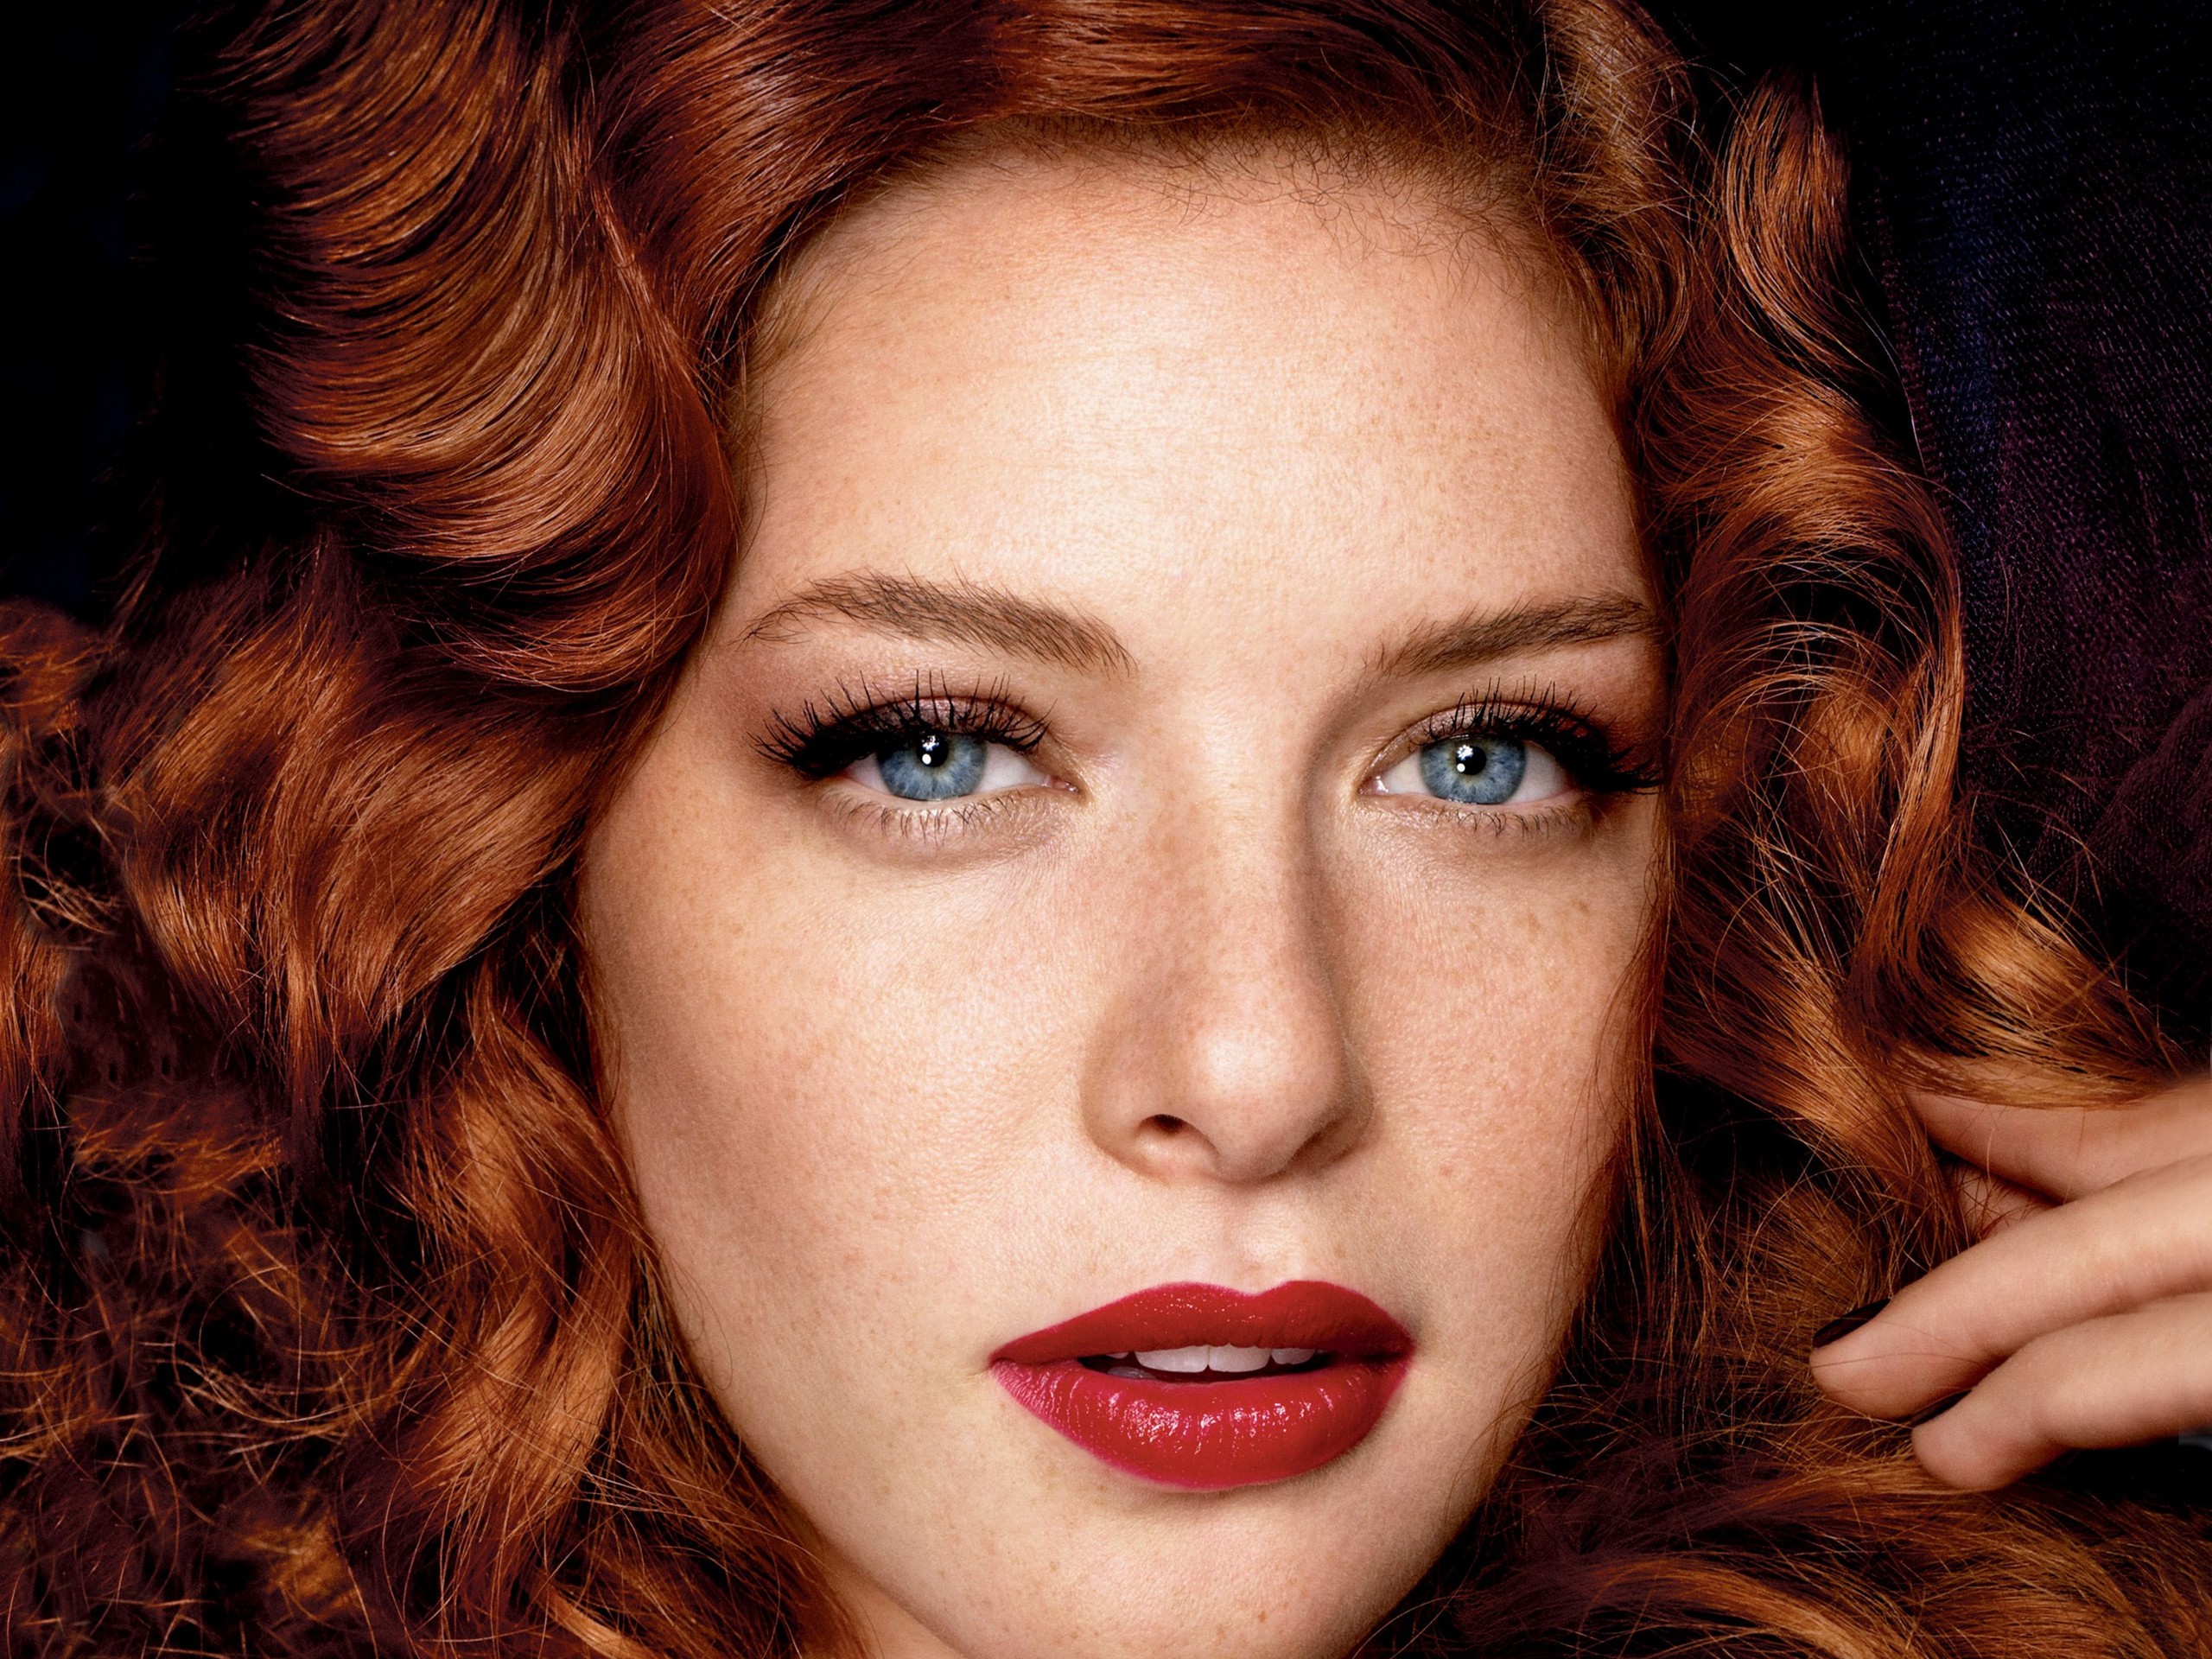 People 2560x1920 women model redhead long hair face portrait blue eyes looking at viewer open mouth Rachelle Lefevre actress wavy hair freckles red lipstick closeup